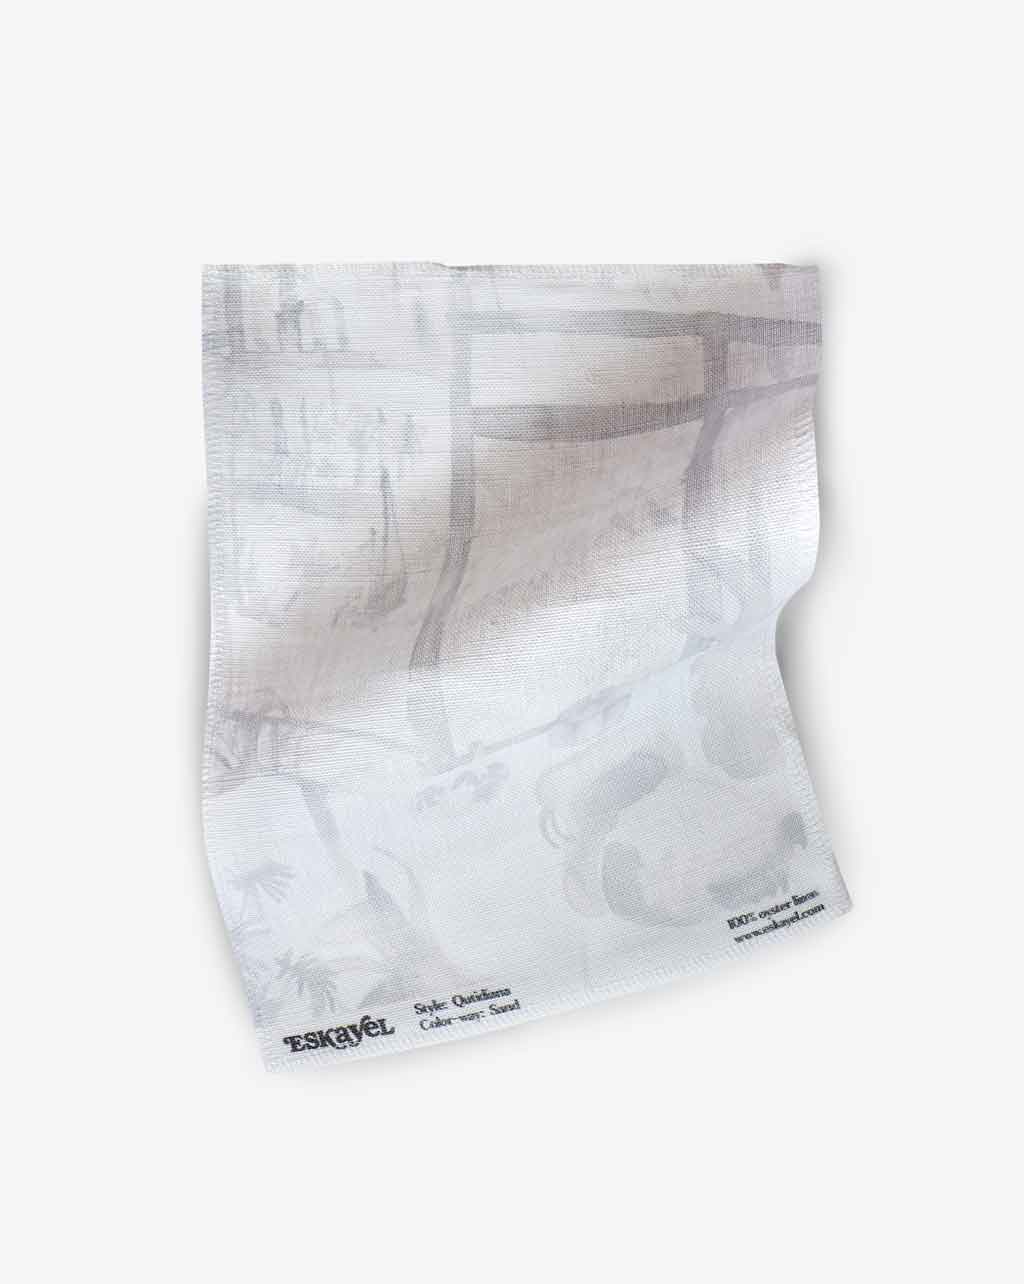 A white Quotidiana Fabric Sand napkin with a map on it